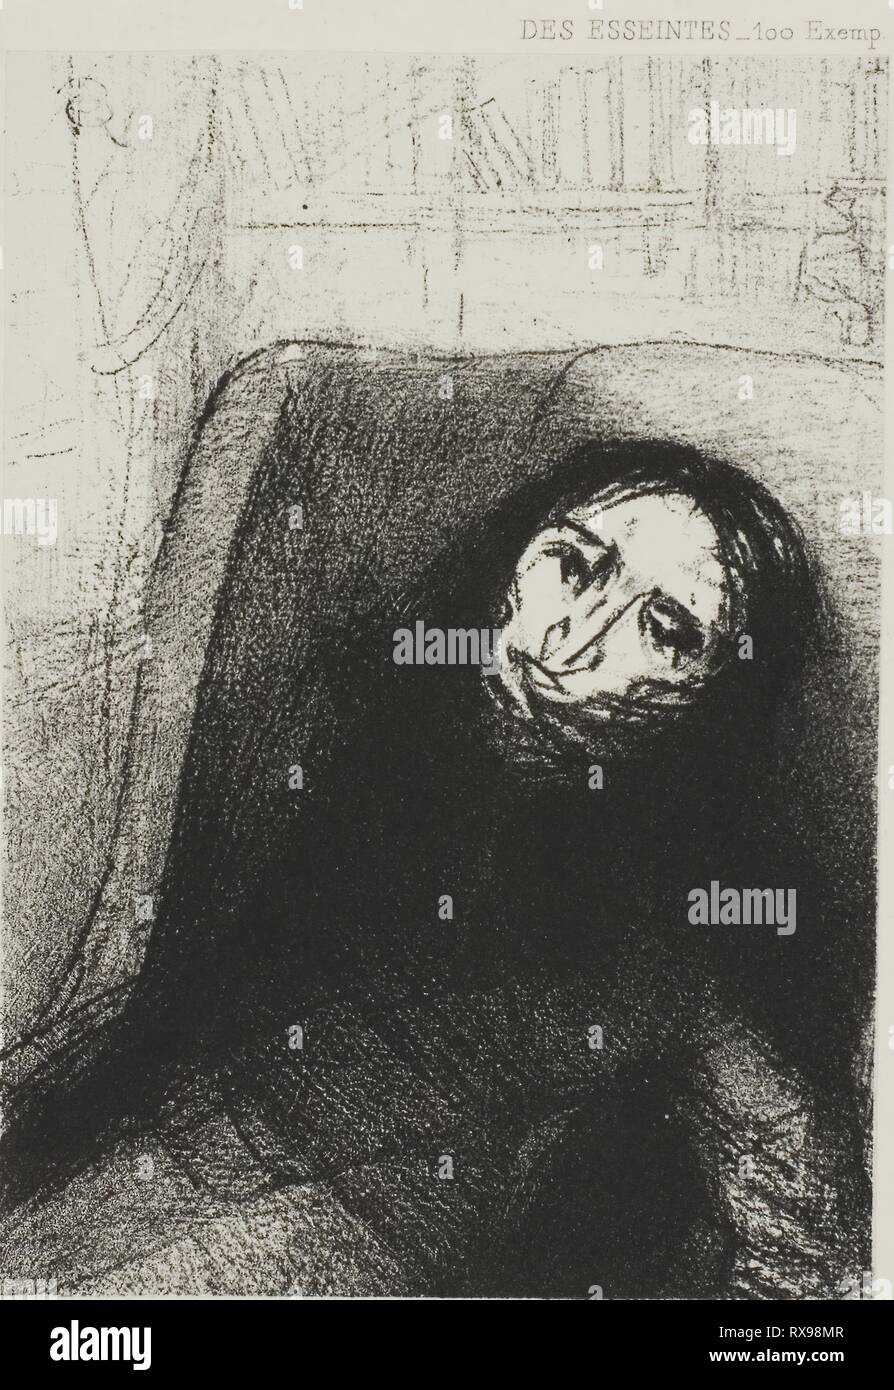 Des Esseintes, Frontispiece for A Rebours by J.K. Huysmans. Odilon Redon; French, 1840-1916. Date: 1888. Dimensions: 128 × 90 mm (image/chine); 416 × 306 mm (sheet). Lithograph in black on light gray China paper laid down on white wove paper. Origin: France. Museum: The Chicago Art Institute. Stock Photo